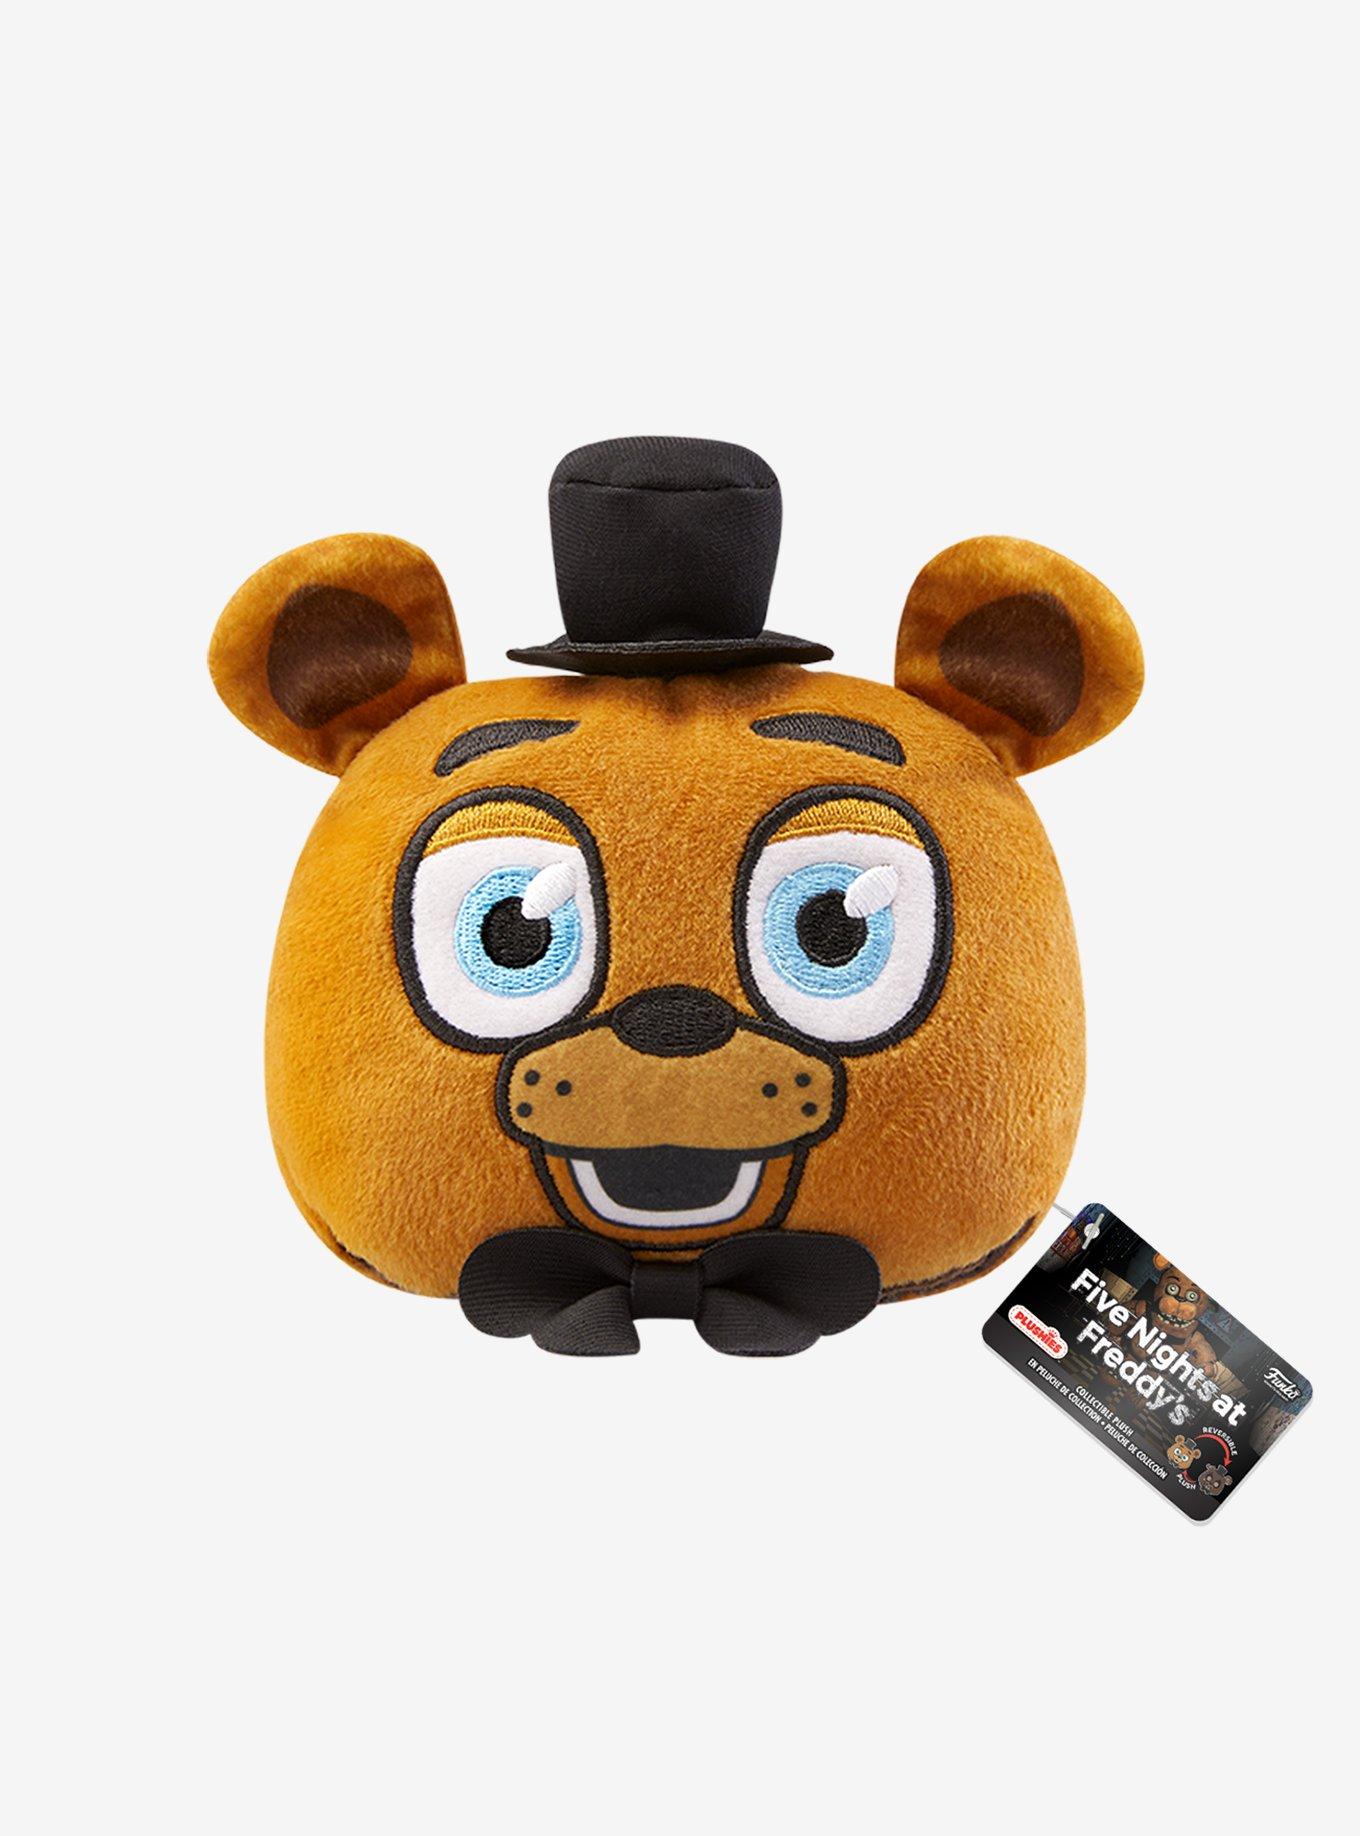 Five Nights At Freddy's Foxy Reversible Plush Hot Topic lupon.gov.ph